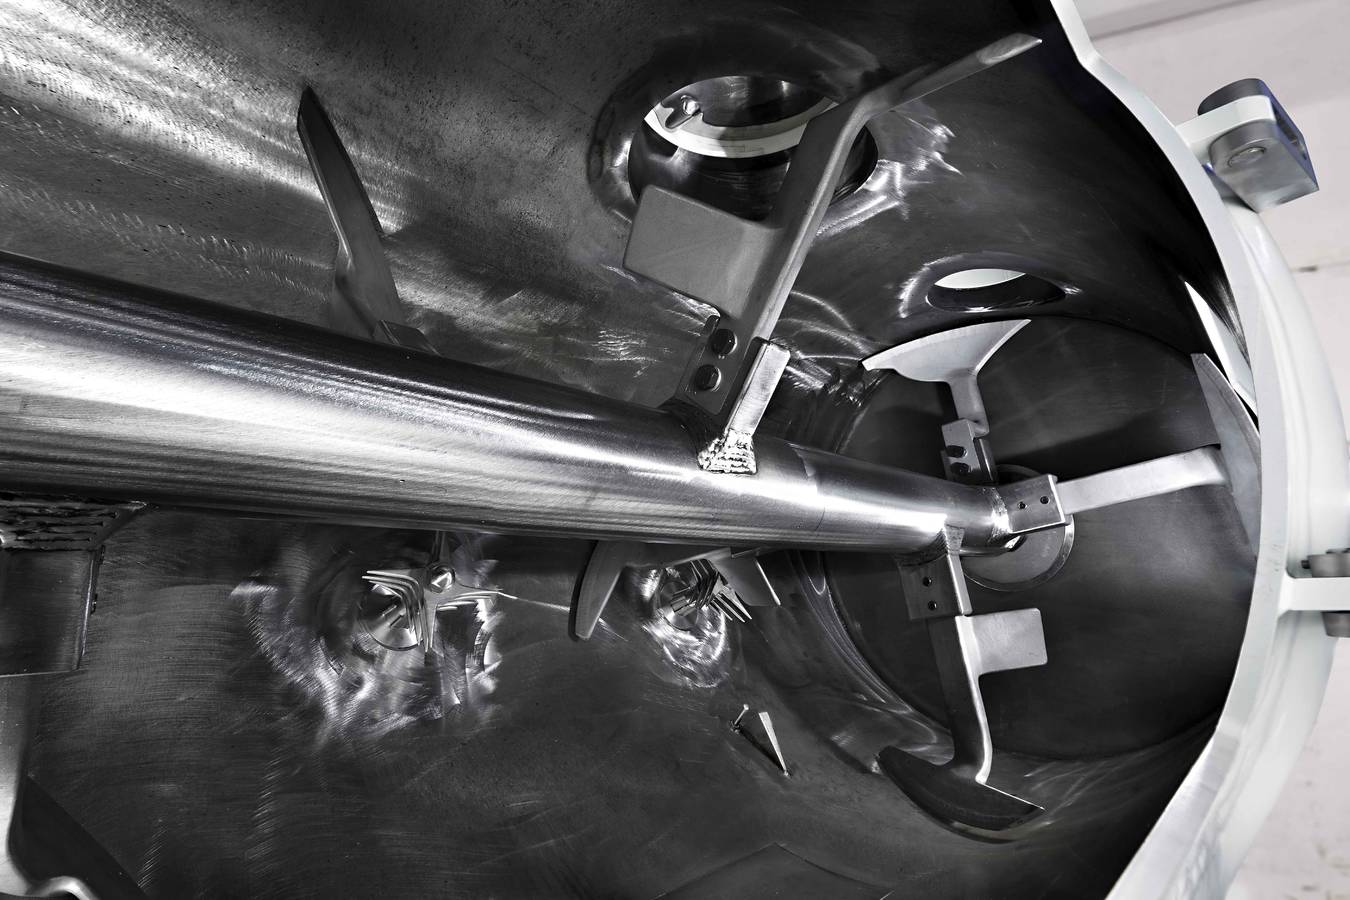 Lödige mixing systems equipped with specifically designed mixing tools and choppers ensure the required mix homogeneity and the dispersion of fibres for the mixing of dry brake and friction materials. (source: Lödige)